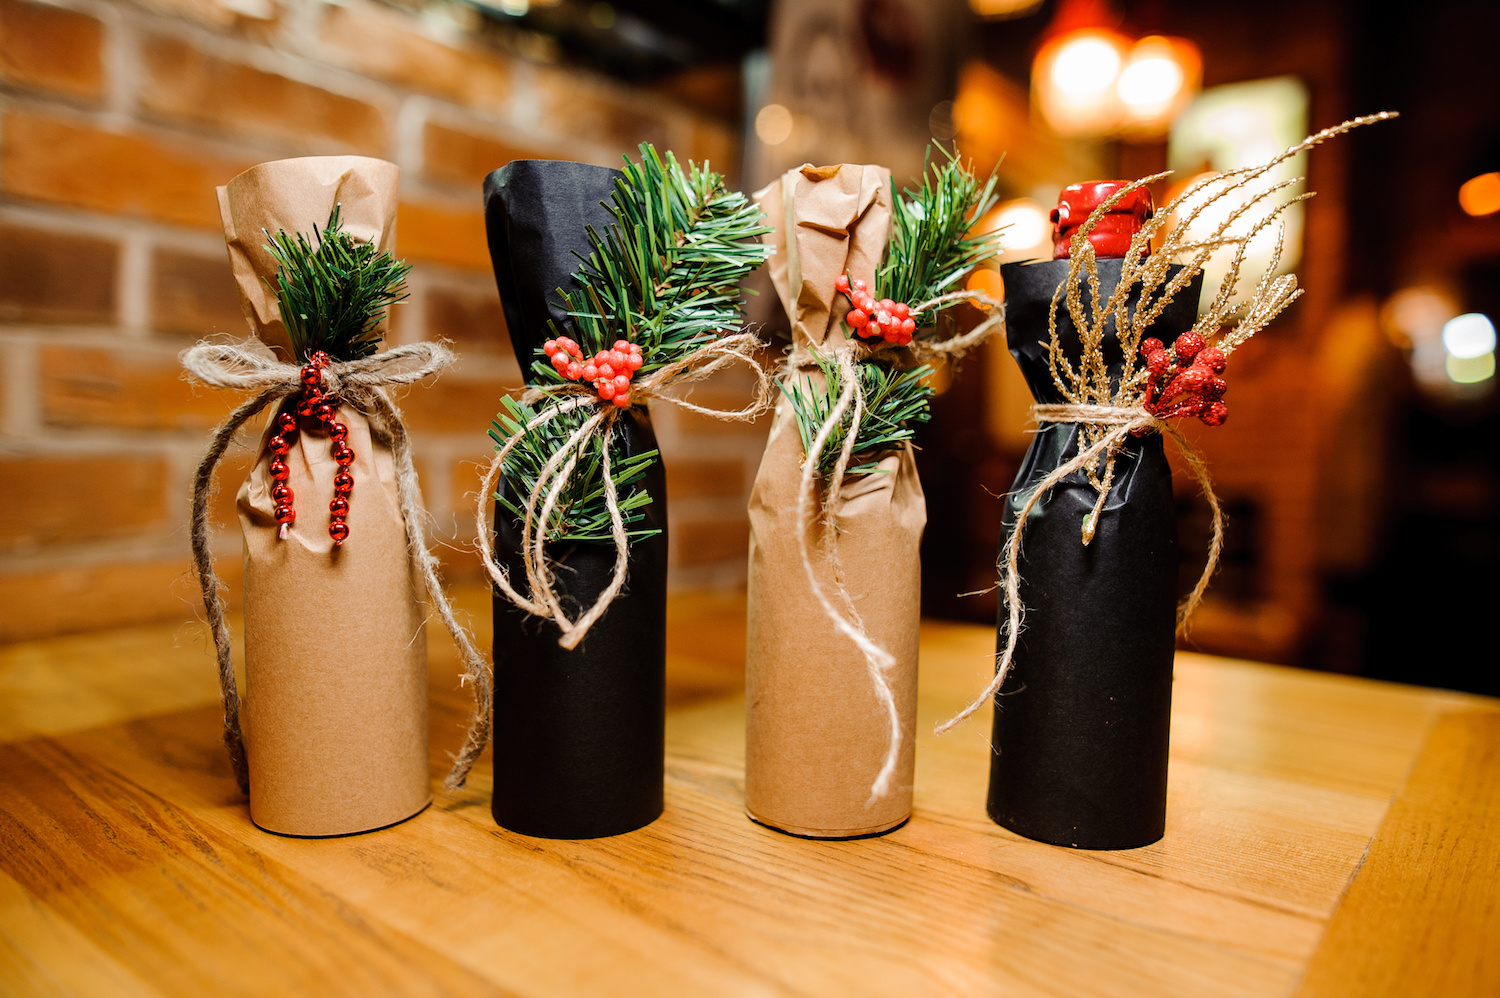 The 2020 Beverage Dynamics Holiday Gift Guide